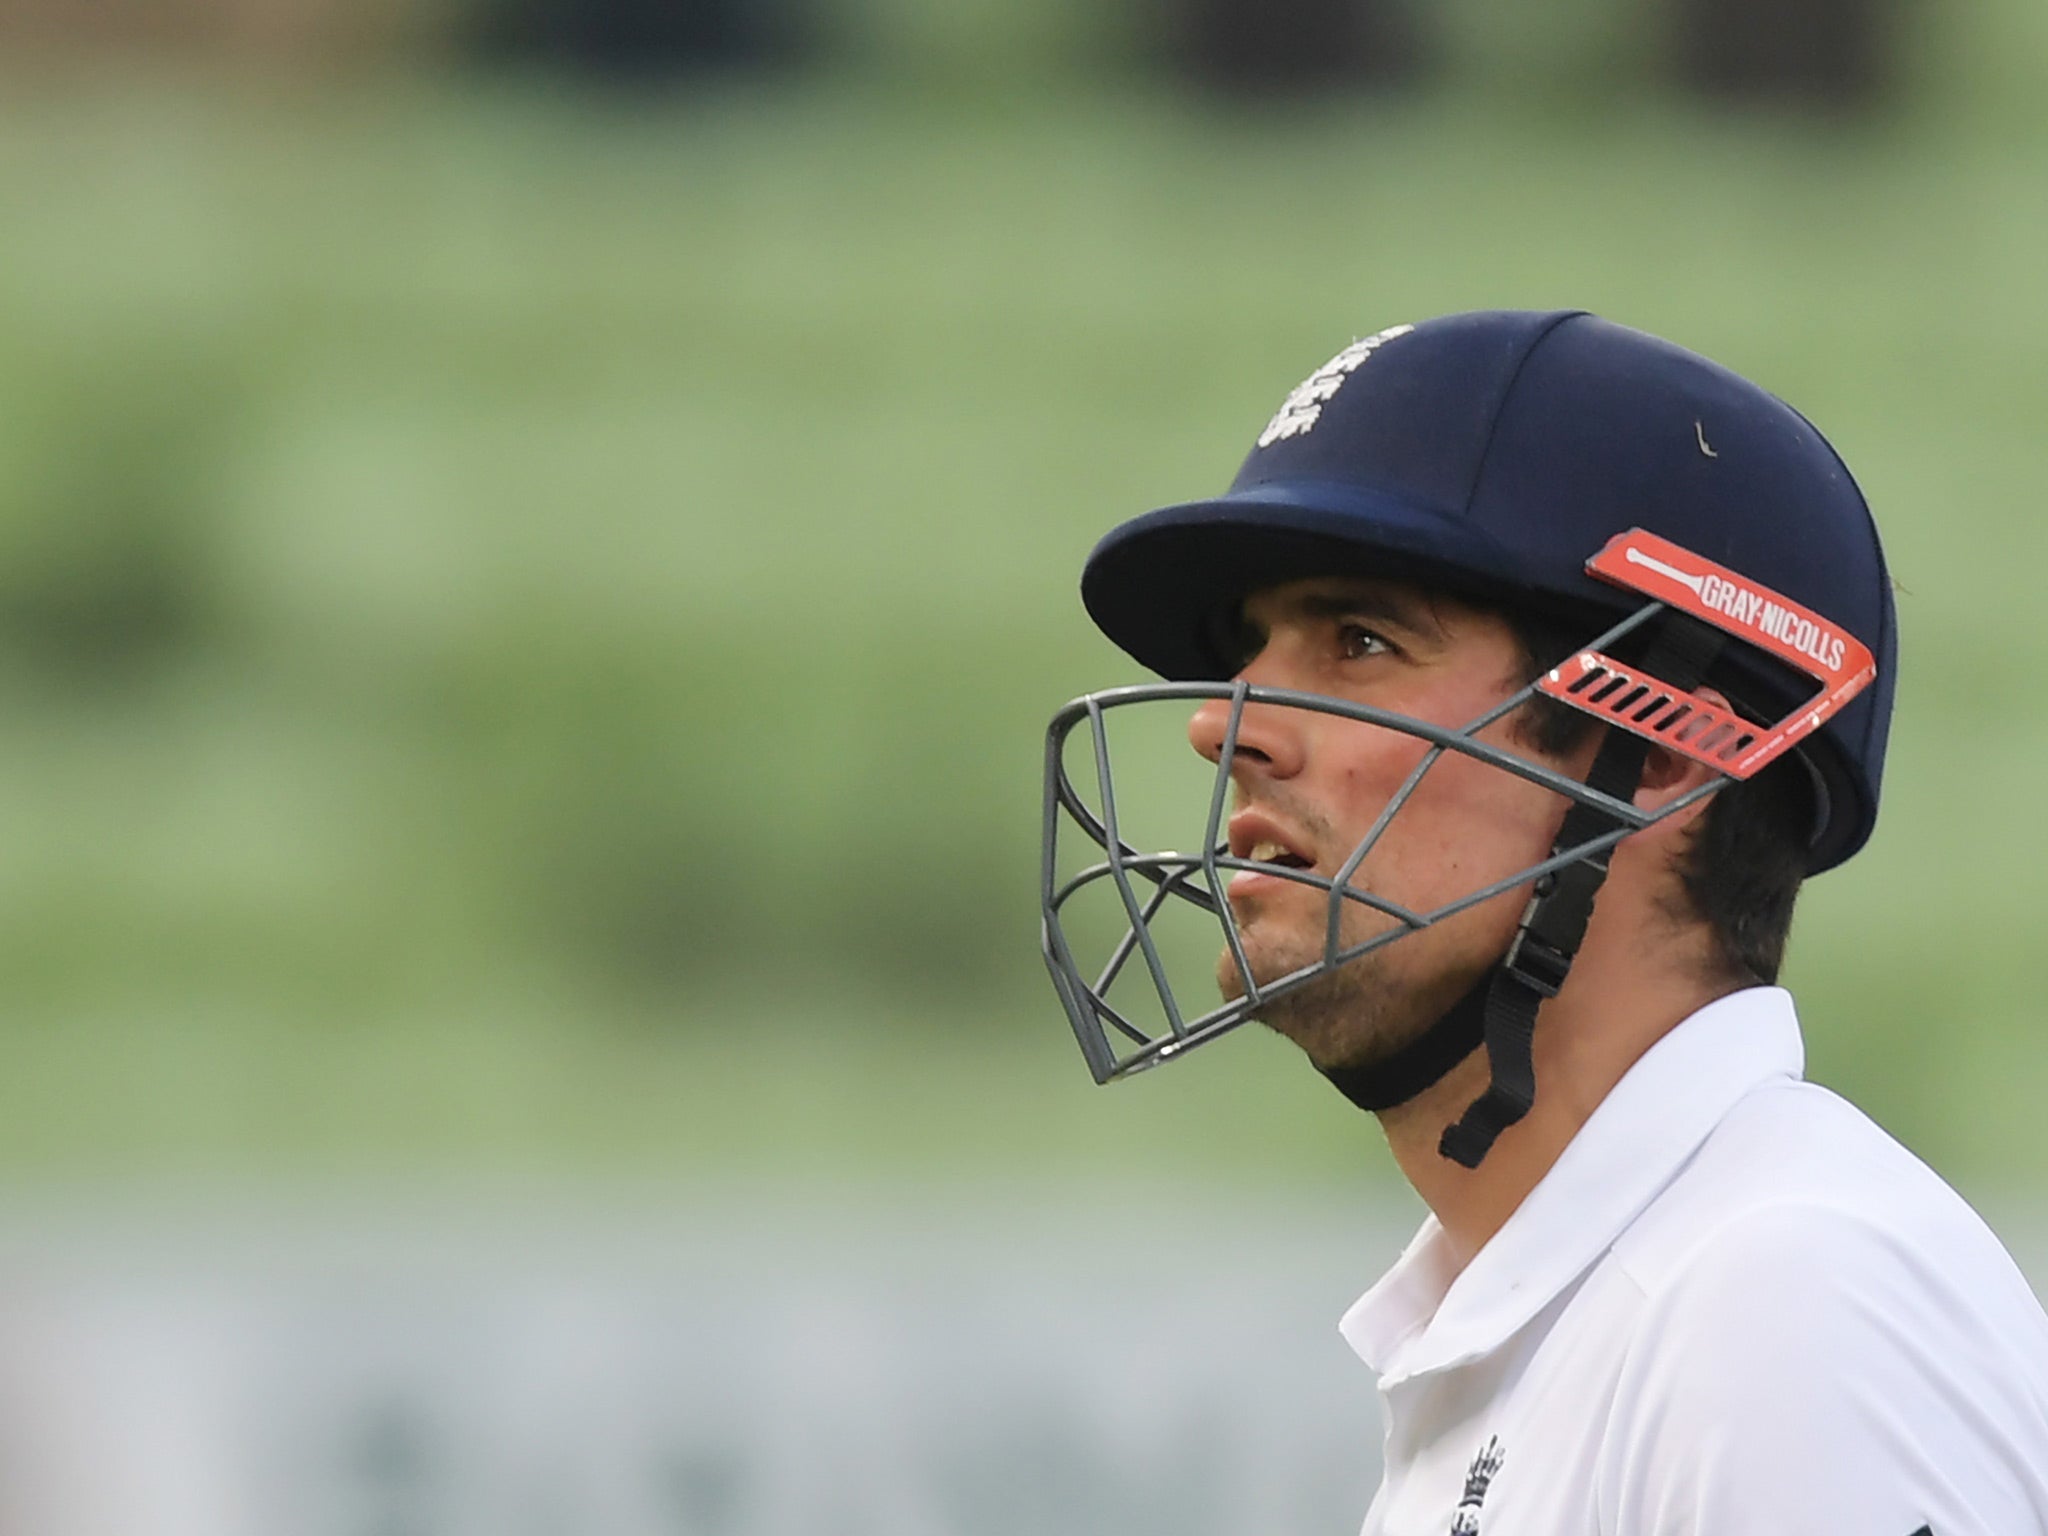 Cook insists he and his coach are thinking along the same lines